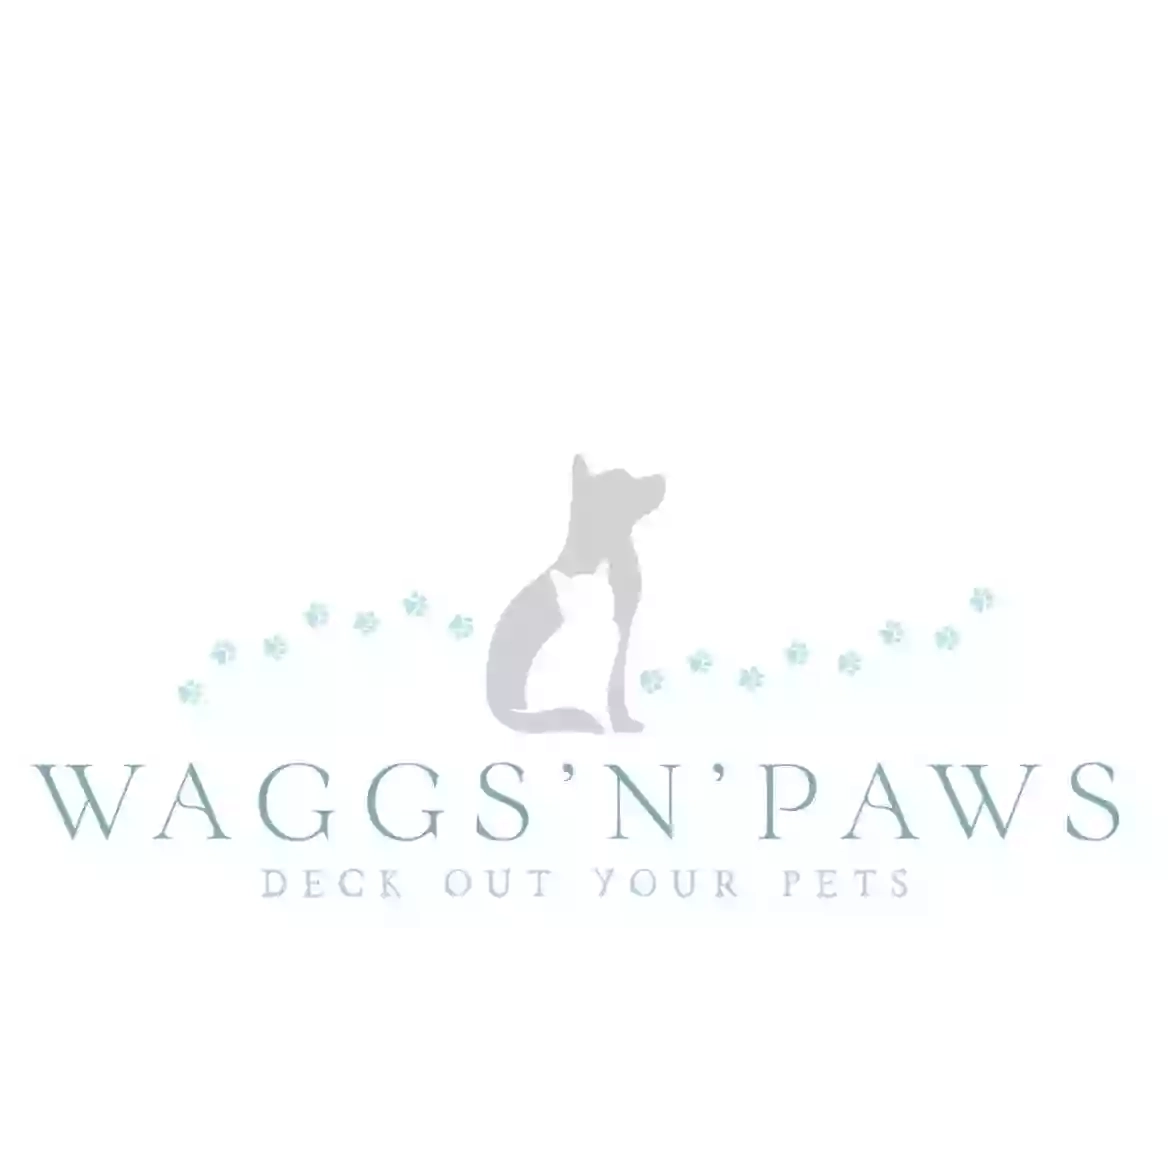 Waggs 'N' Paws